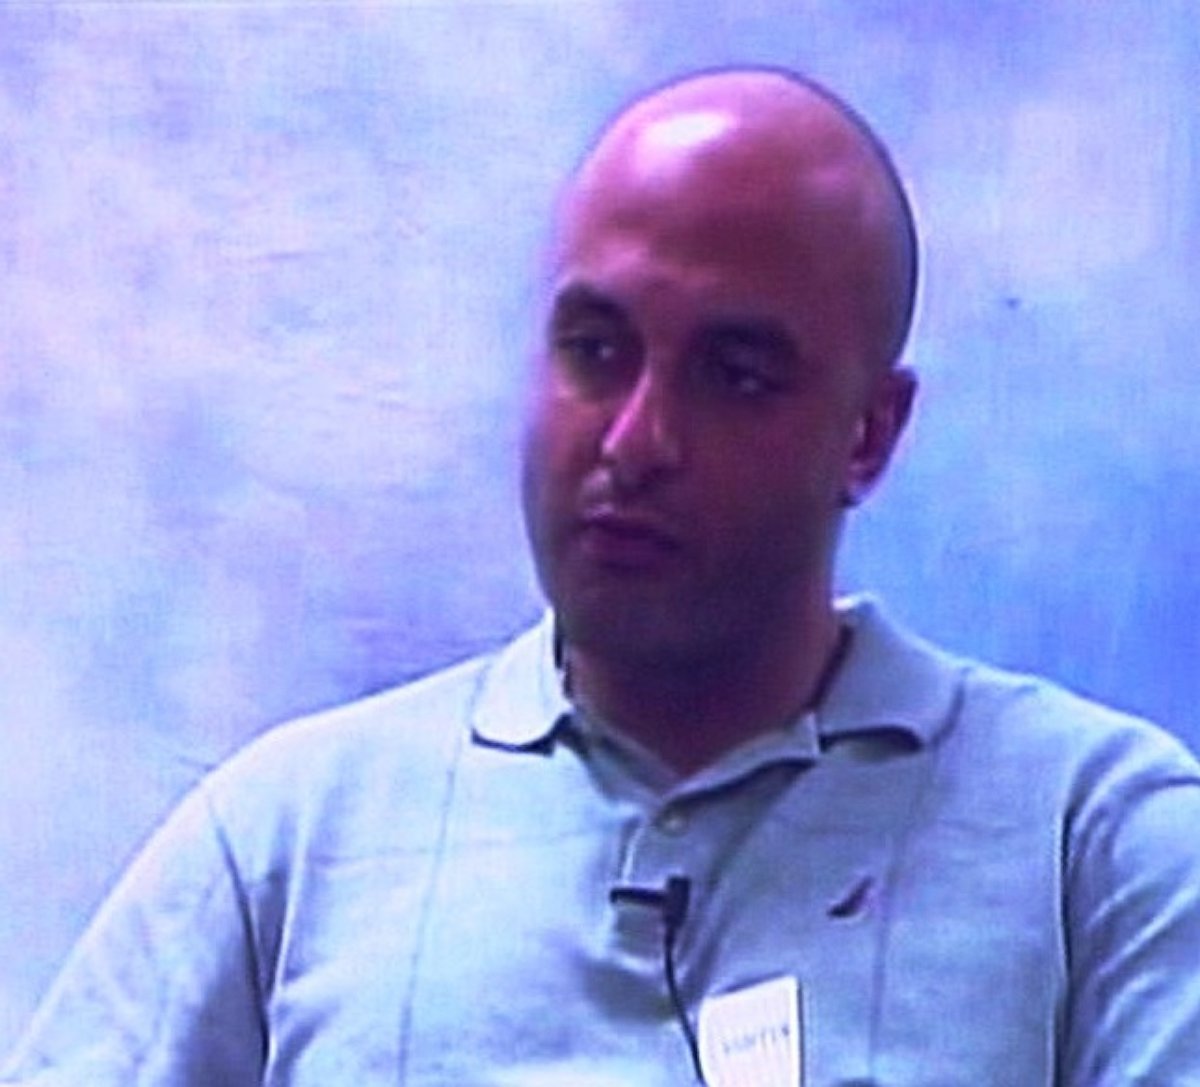 Mohamed Shihadeh is shown here during an interview with the Boynton Beach Police Department.